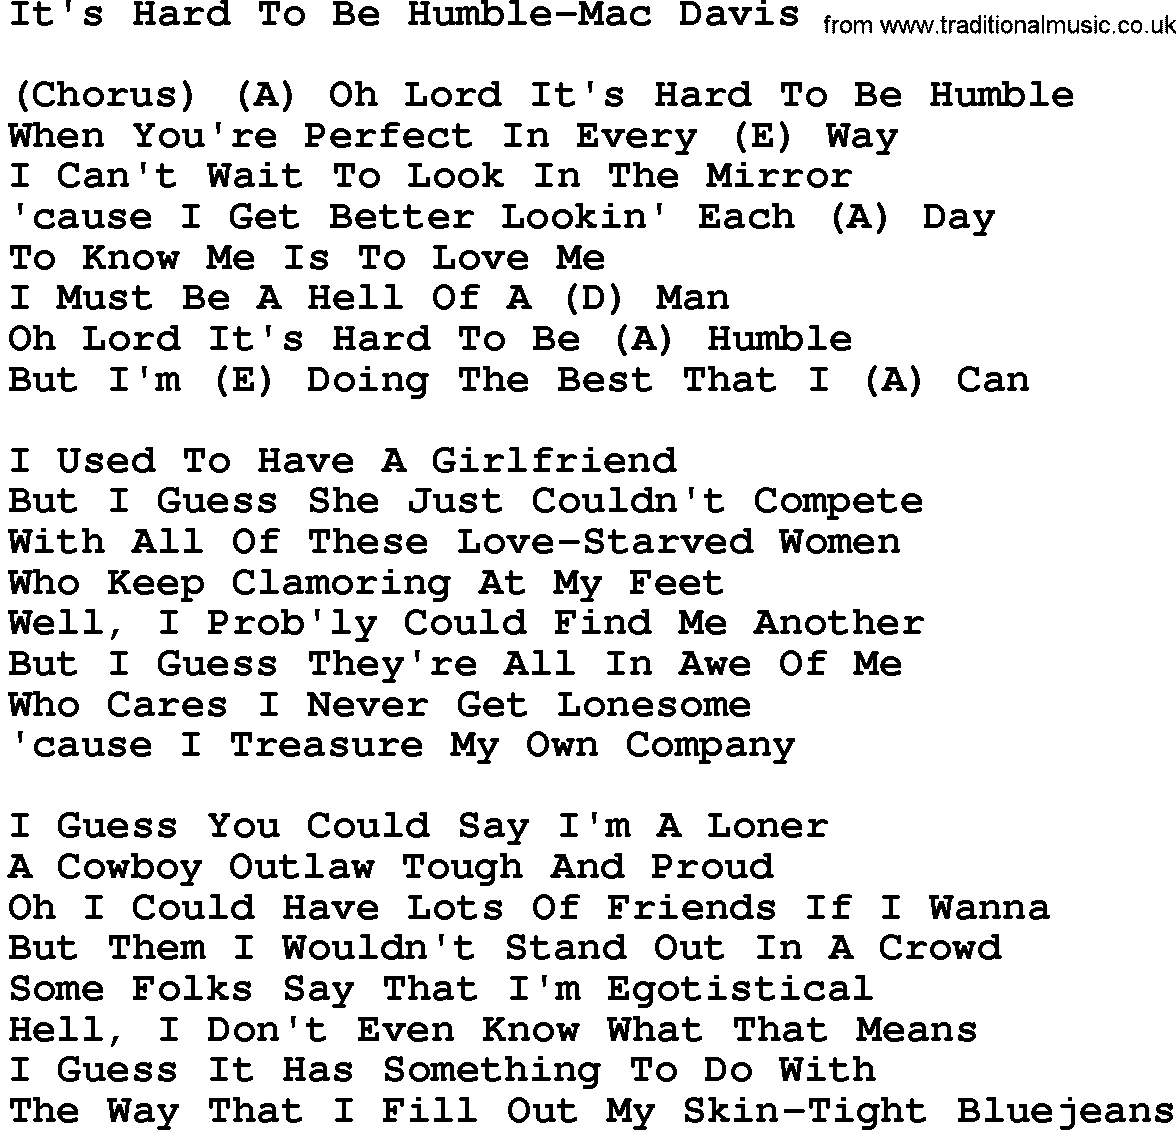 Country music song: It's Hard To Be Humble-Mac Davis lyrics and chords